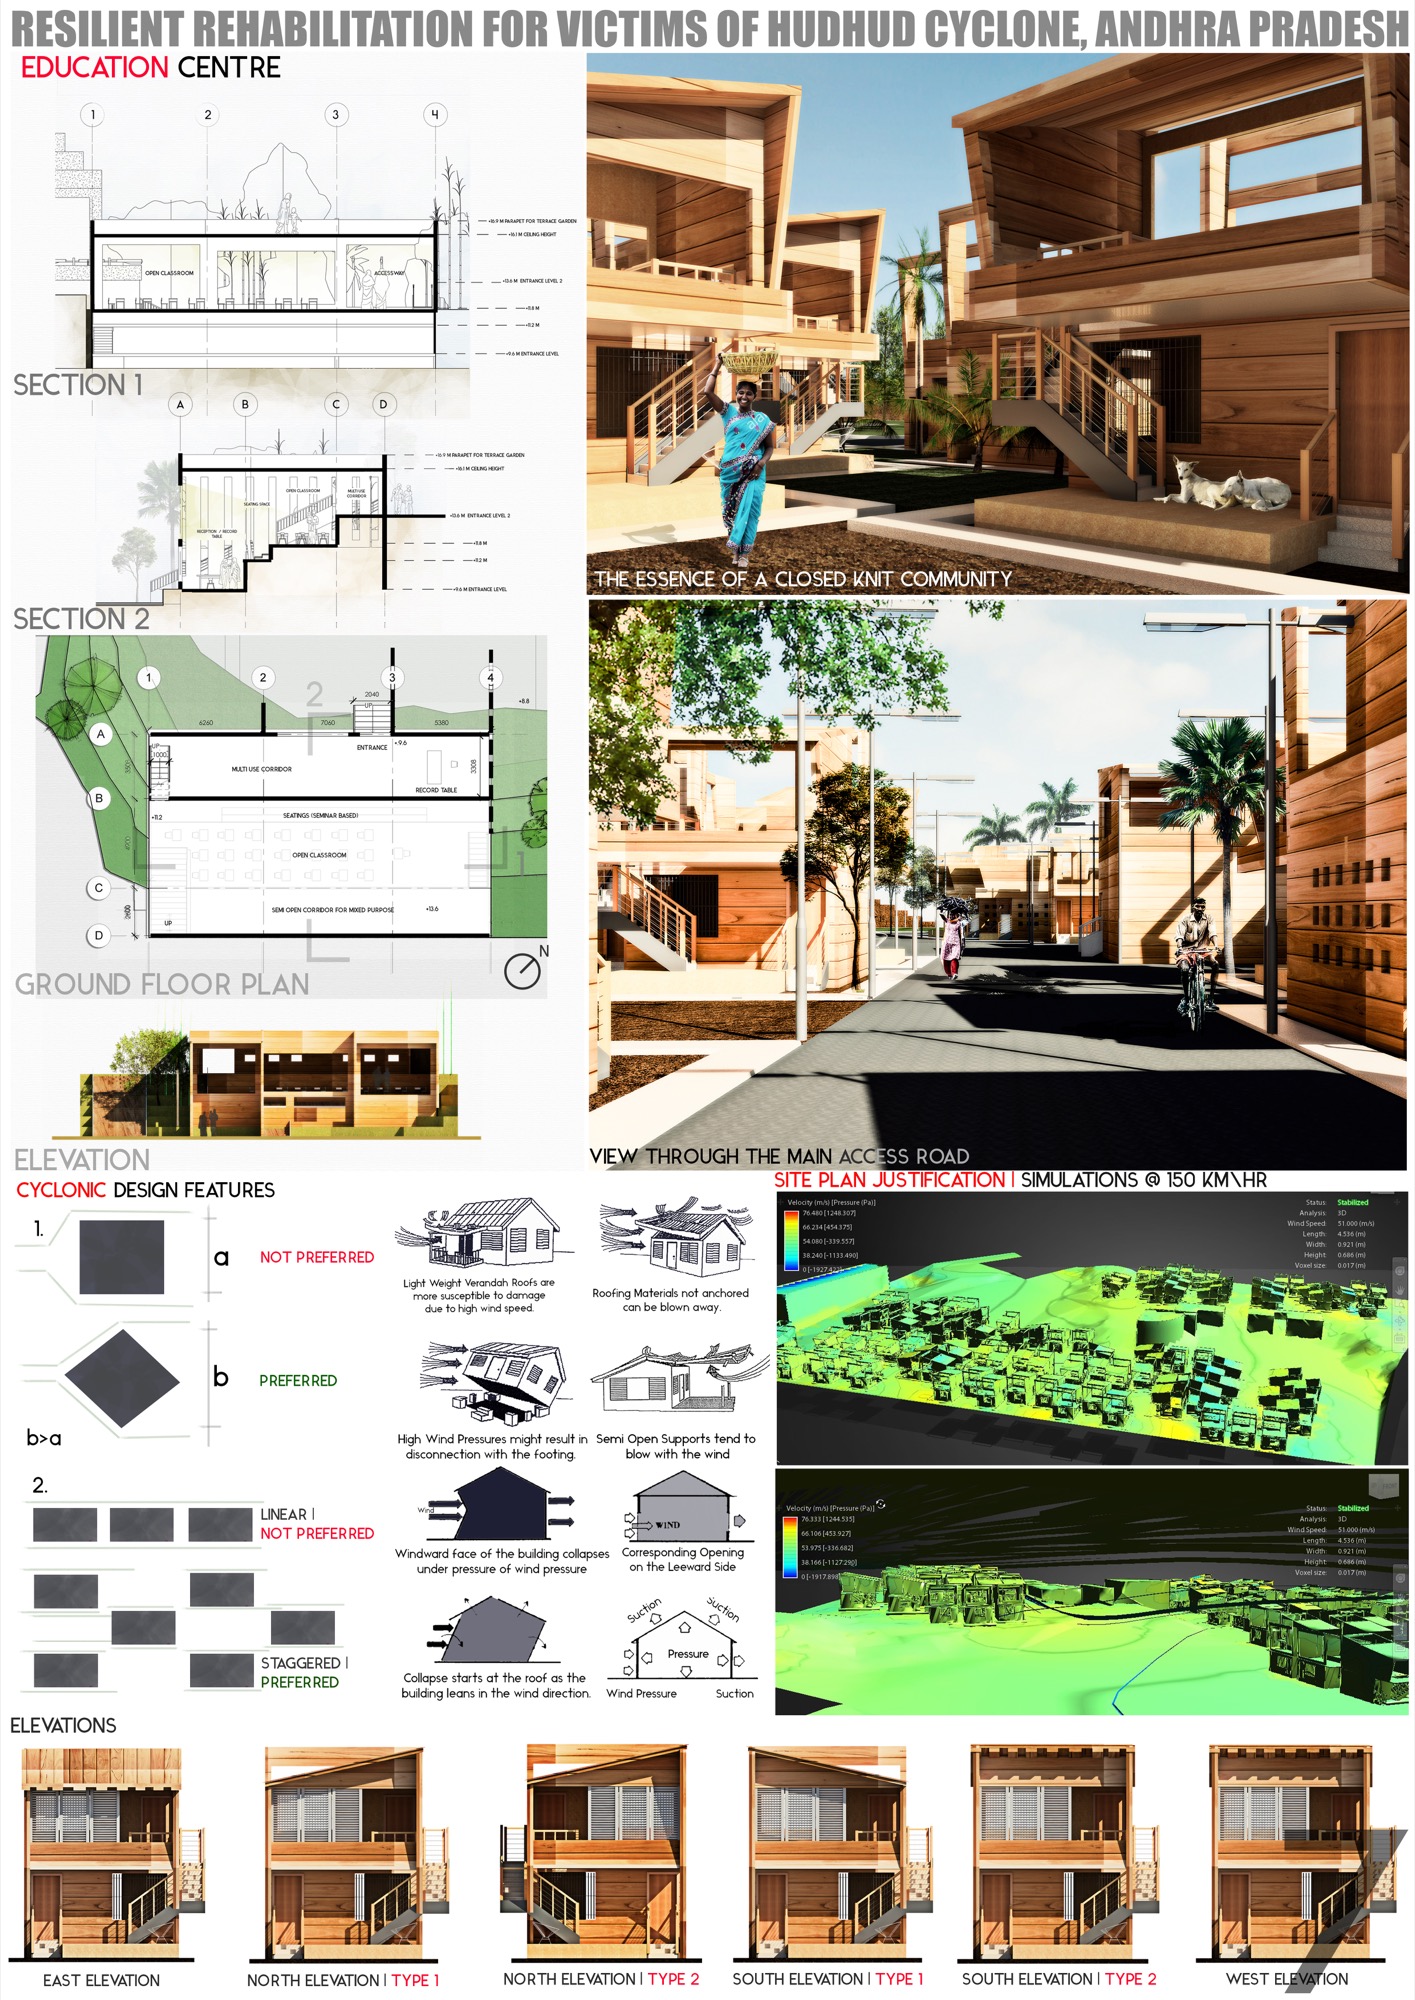 B.Arch Thesis: RESILIENT REHABILITATION FOR VICTIMS OF HUDHUD CYCLONE, ANDHRA PRADESH, by Sanand Telang 15